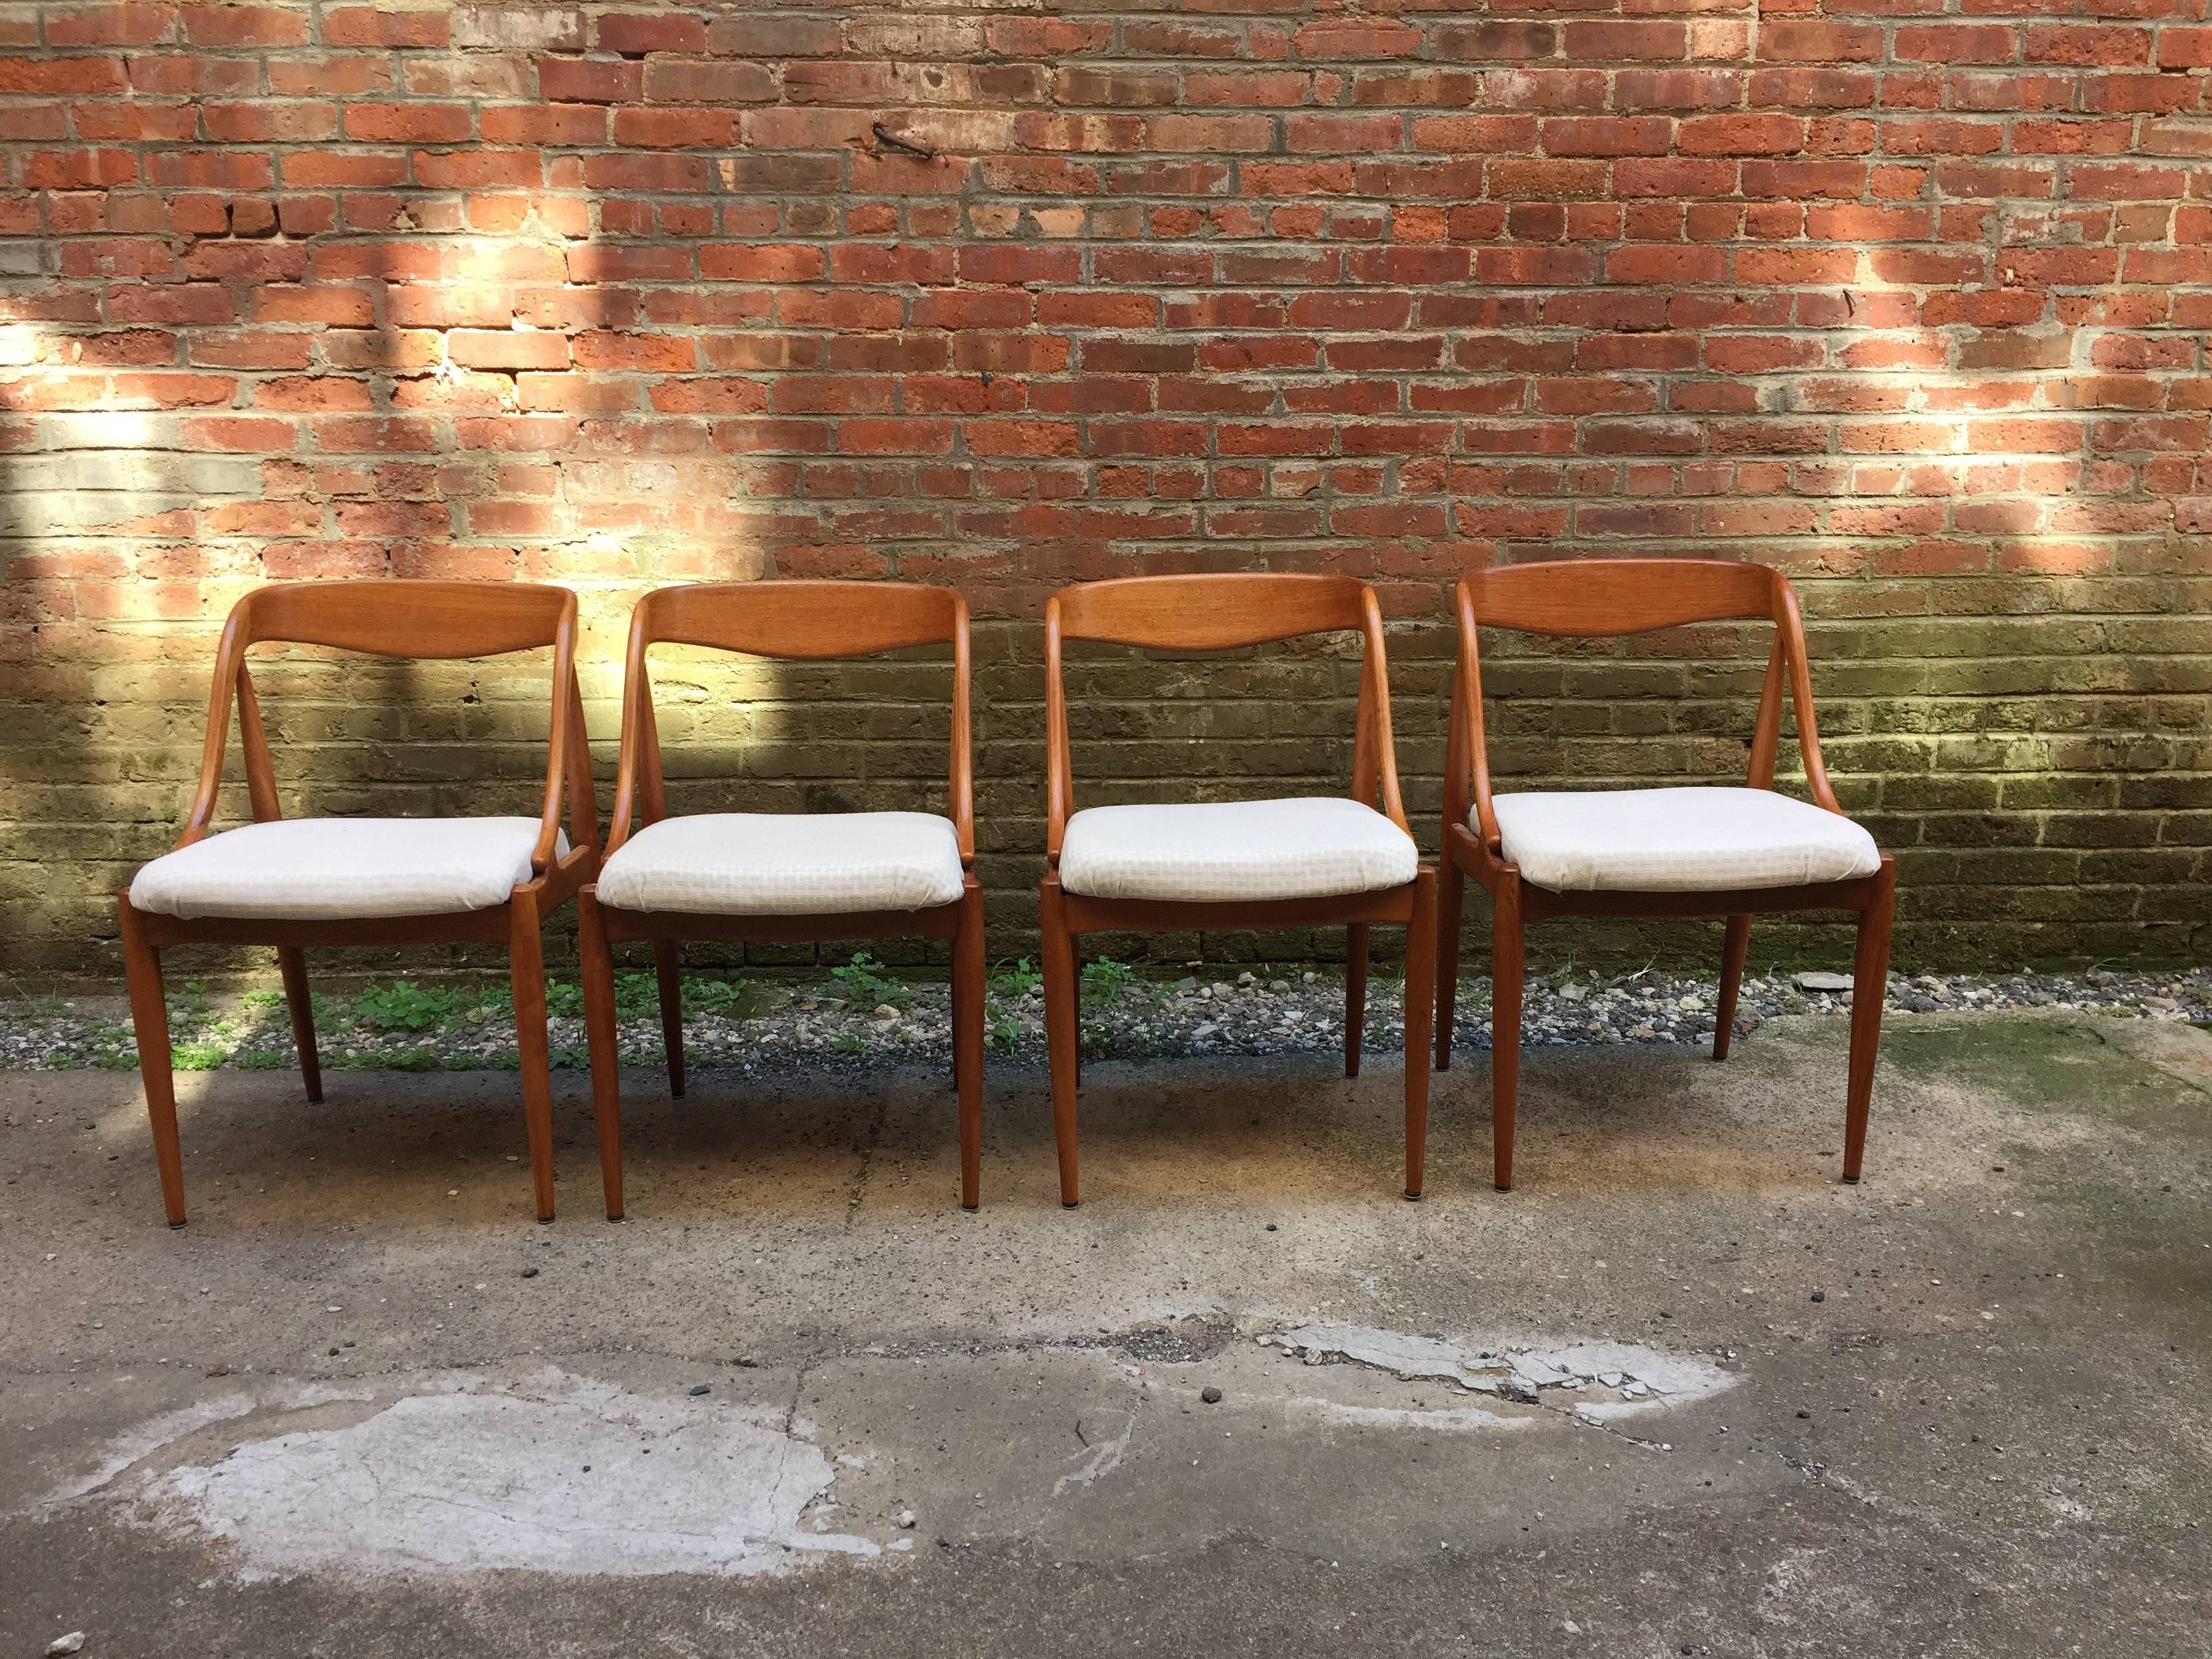 Set of four curvaceous teak dining chairs designed by Johannes Andersen for Moreddi. Covered in a neutral interlace pattern fabric. Fully signed on the bottom of each chair with Danish control stamp.